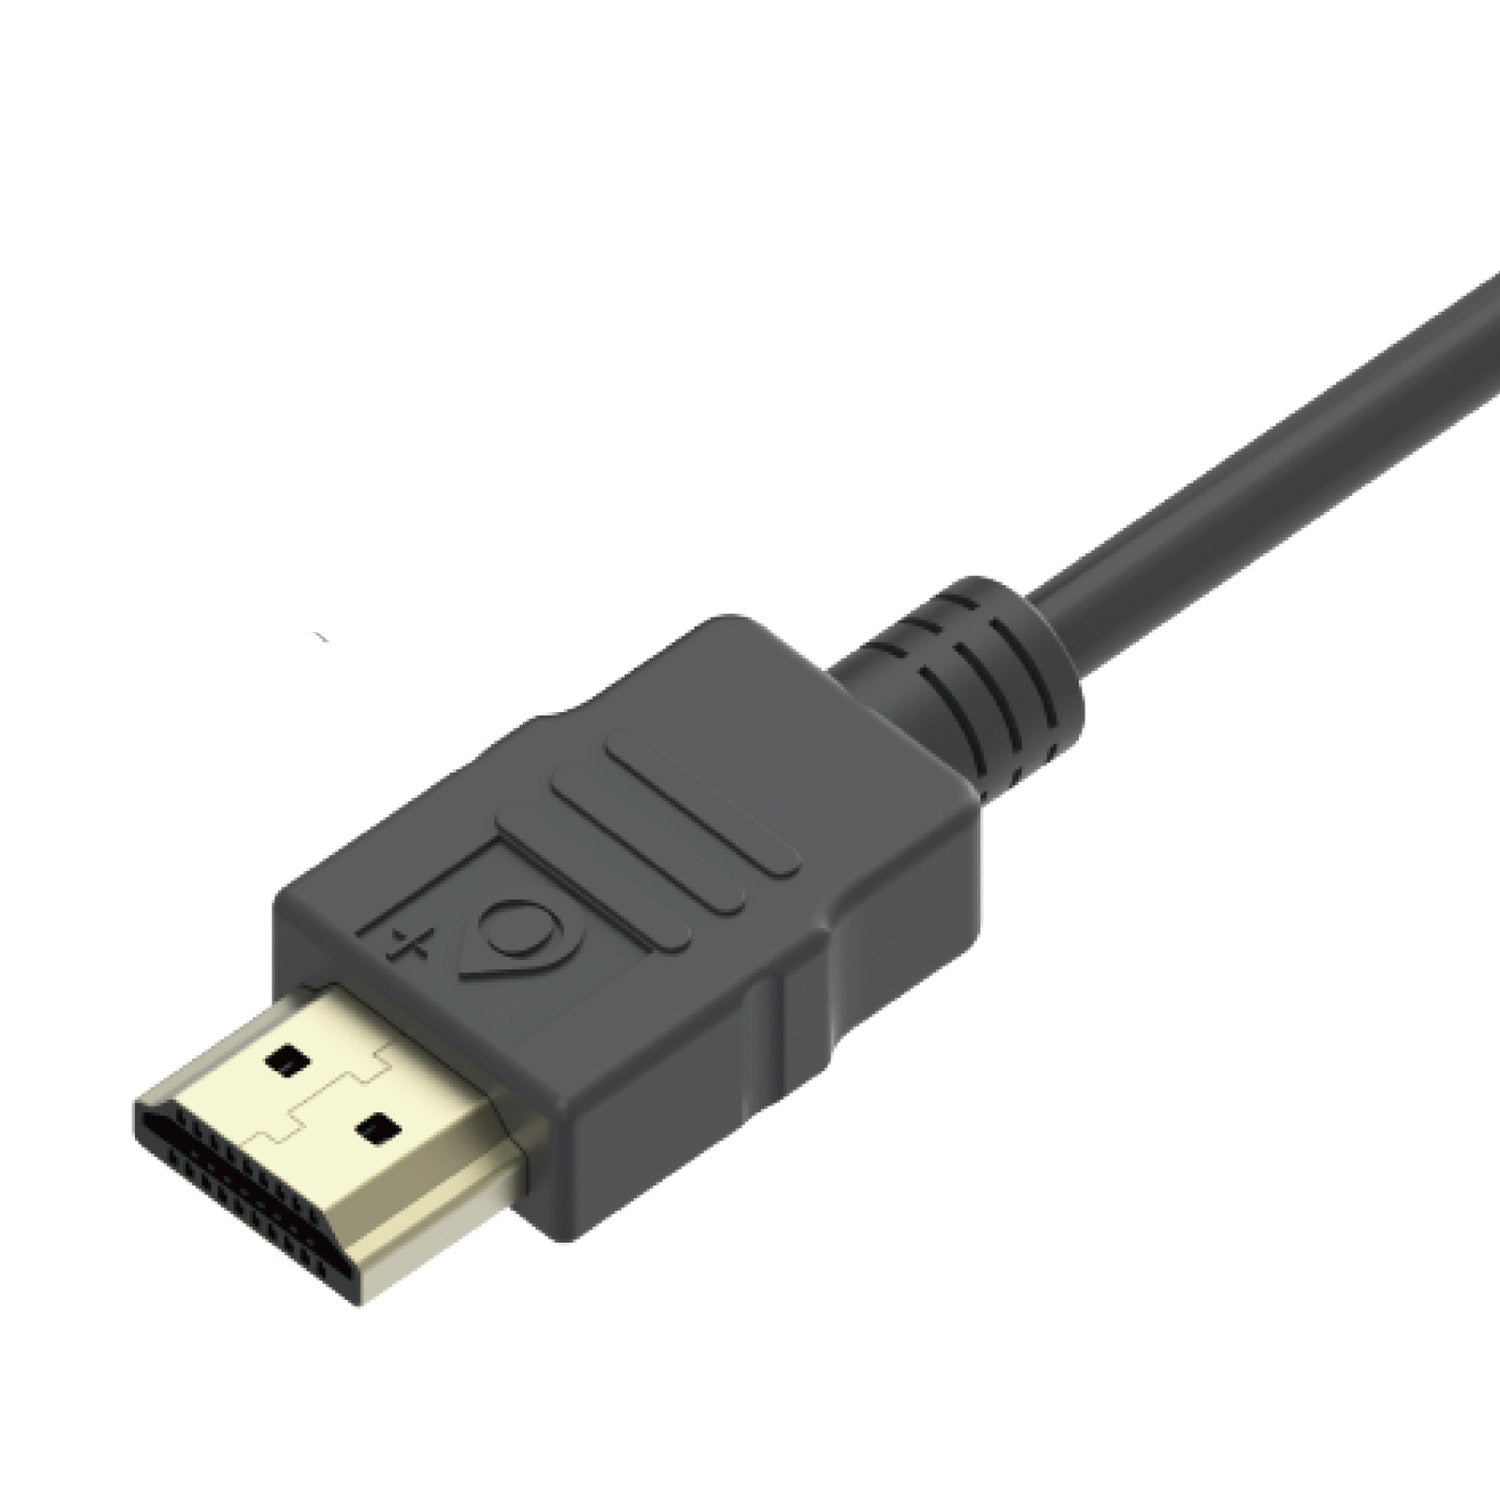 Cable One Plus TB1236 USB Tipo C a USB Tipo C 1m Negro